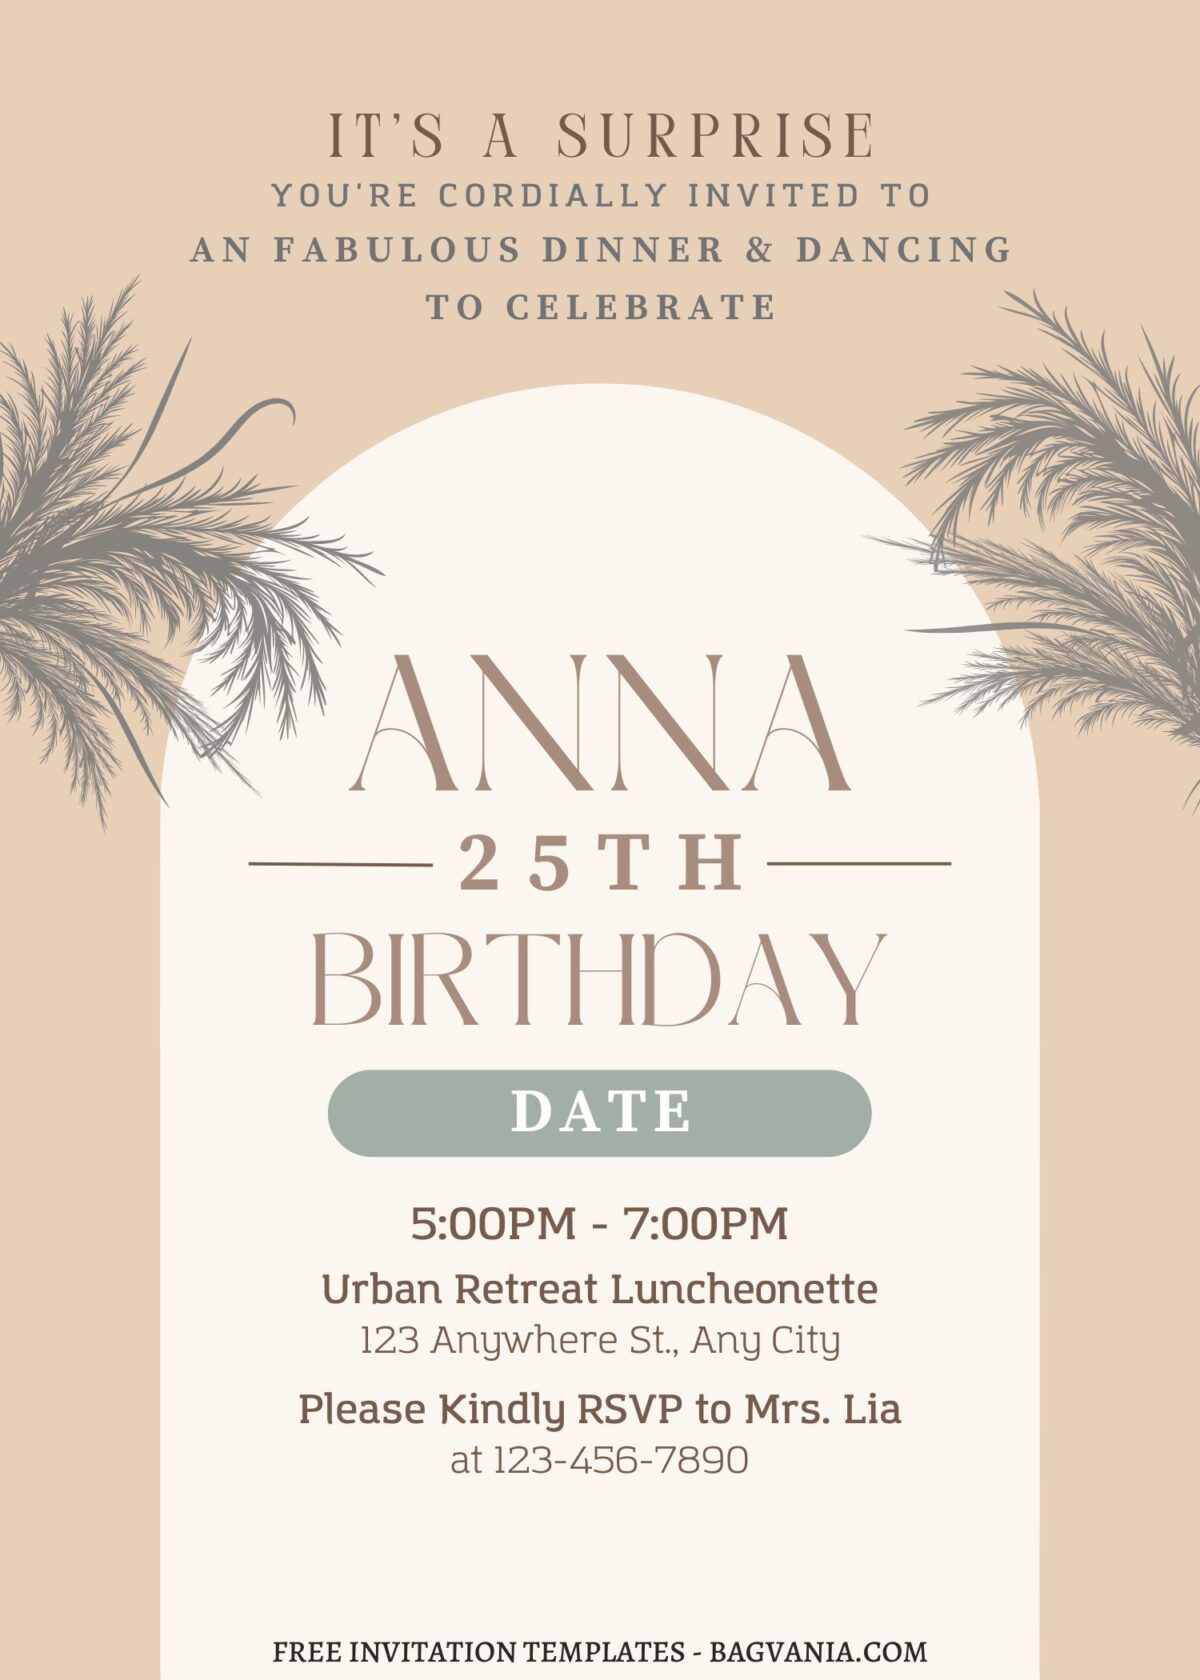 (Free) 9+ Aesthetic Summer Love Canva Birthday Invitation Templates with watercolor greenery